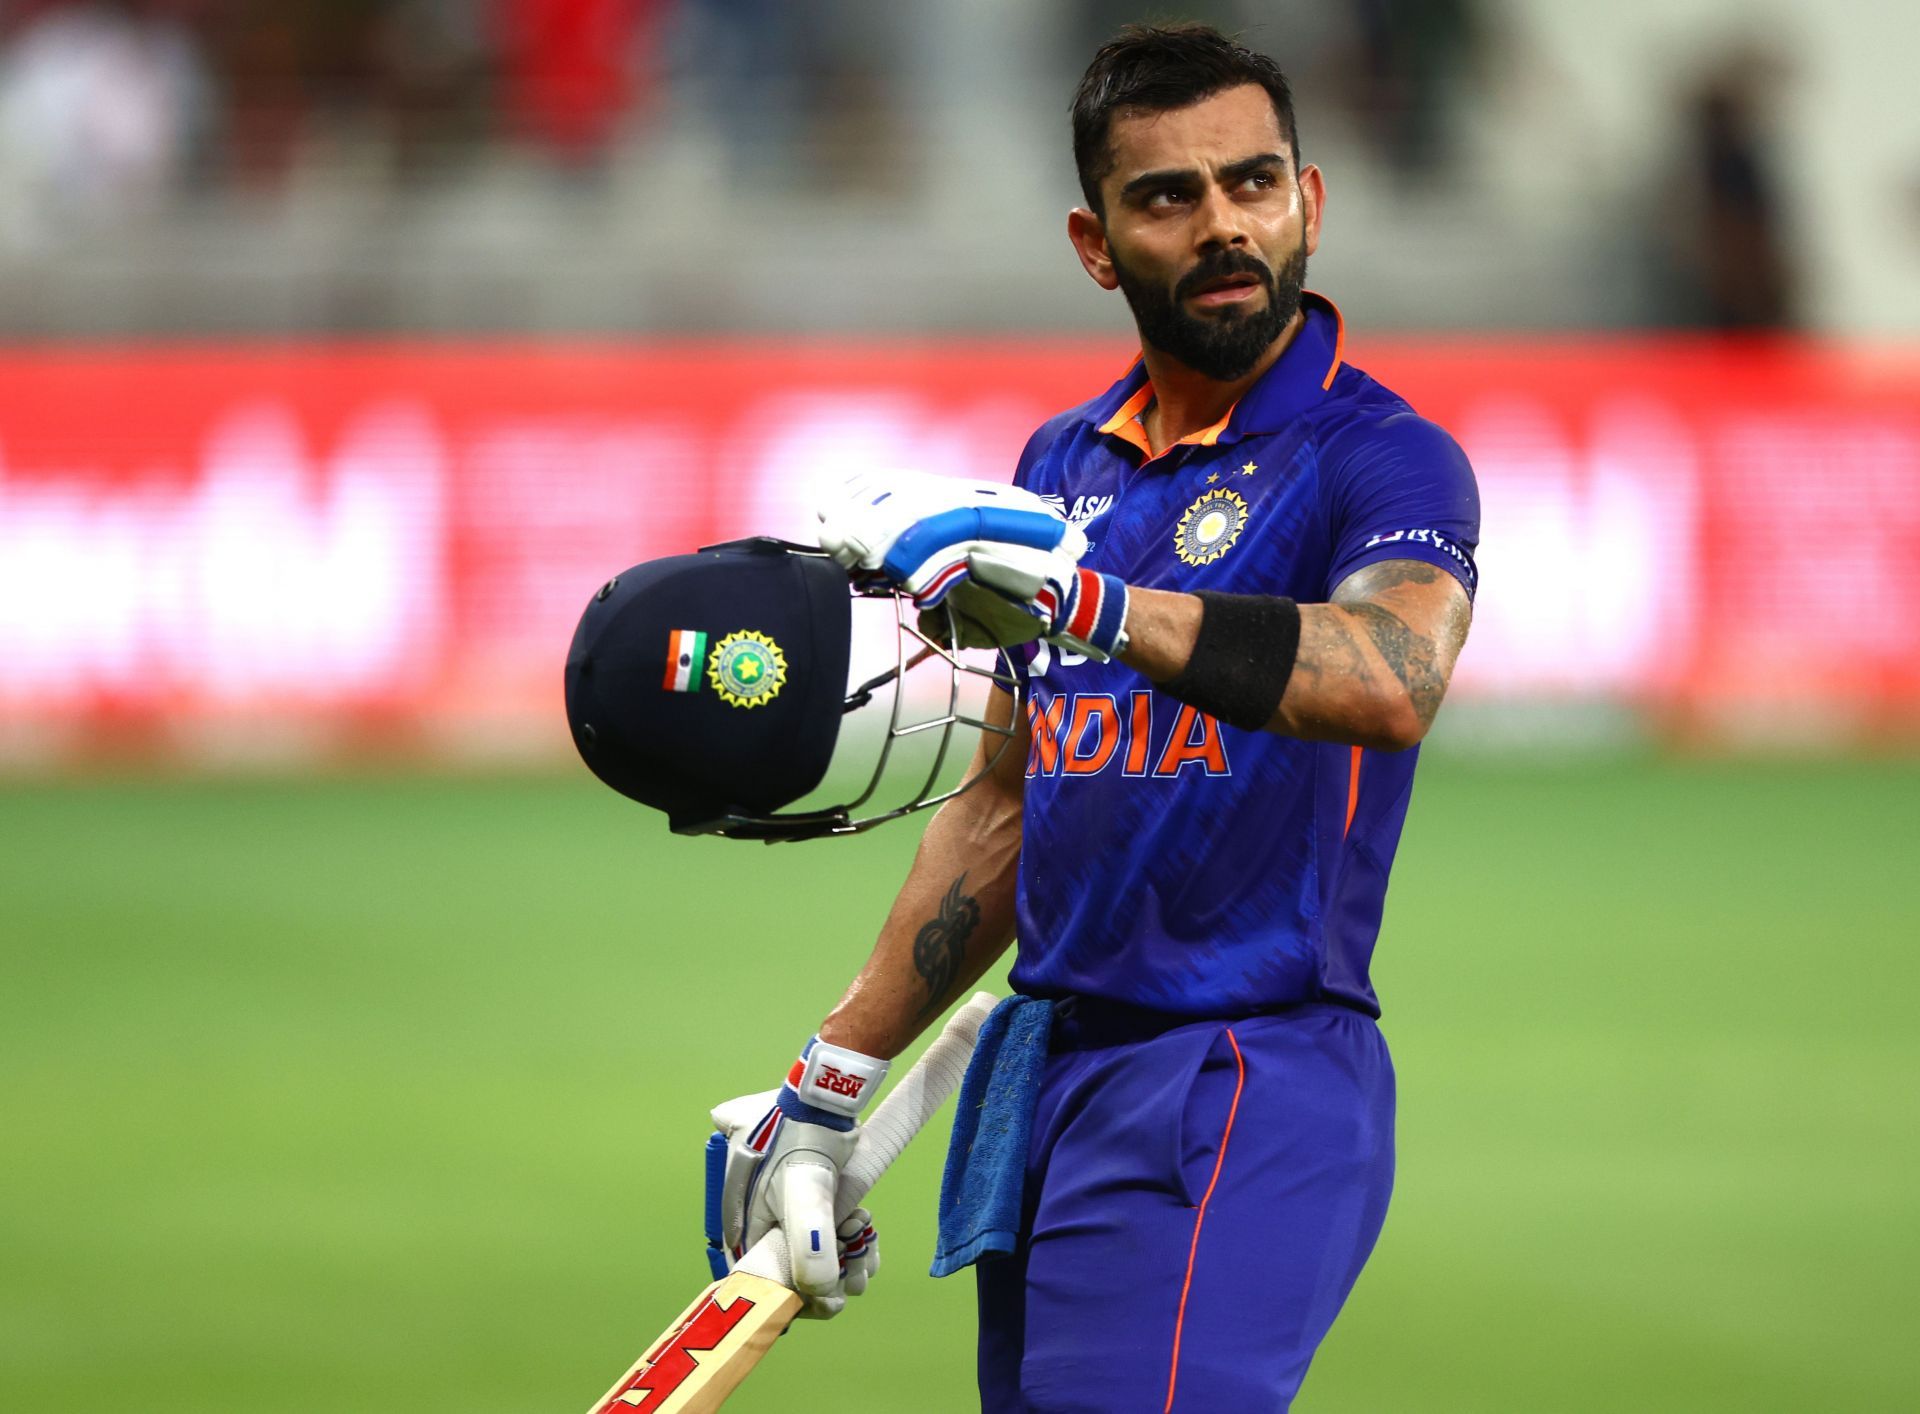 Virat Kohli did not expect his century drought to end the way it did. (Image: getty)